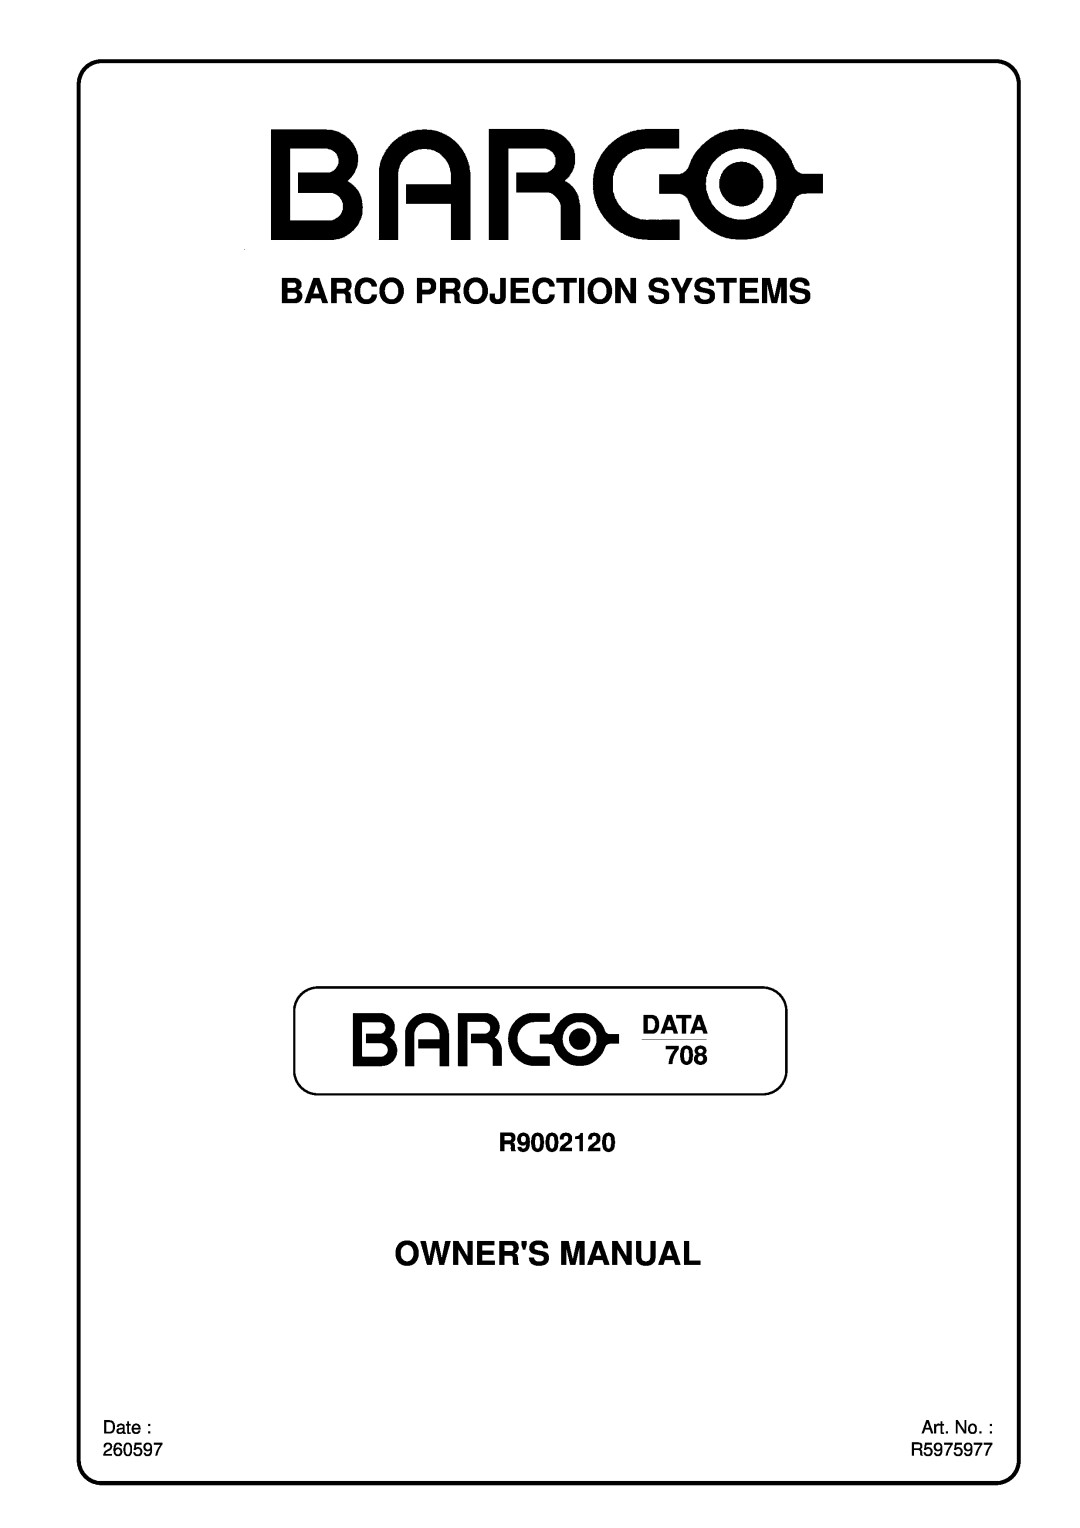 Barco R9002120 manual Barco Projection Systems, Owners Manual, Data, Date, Art. No, 260597, R5975977 